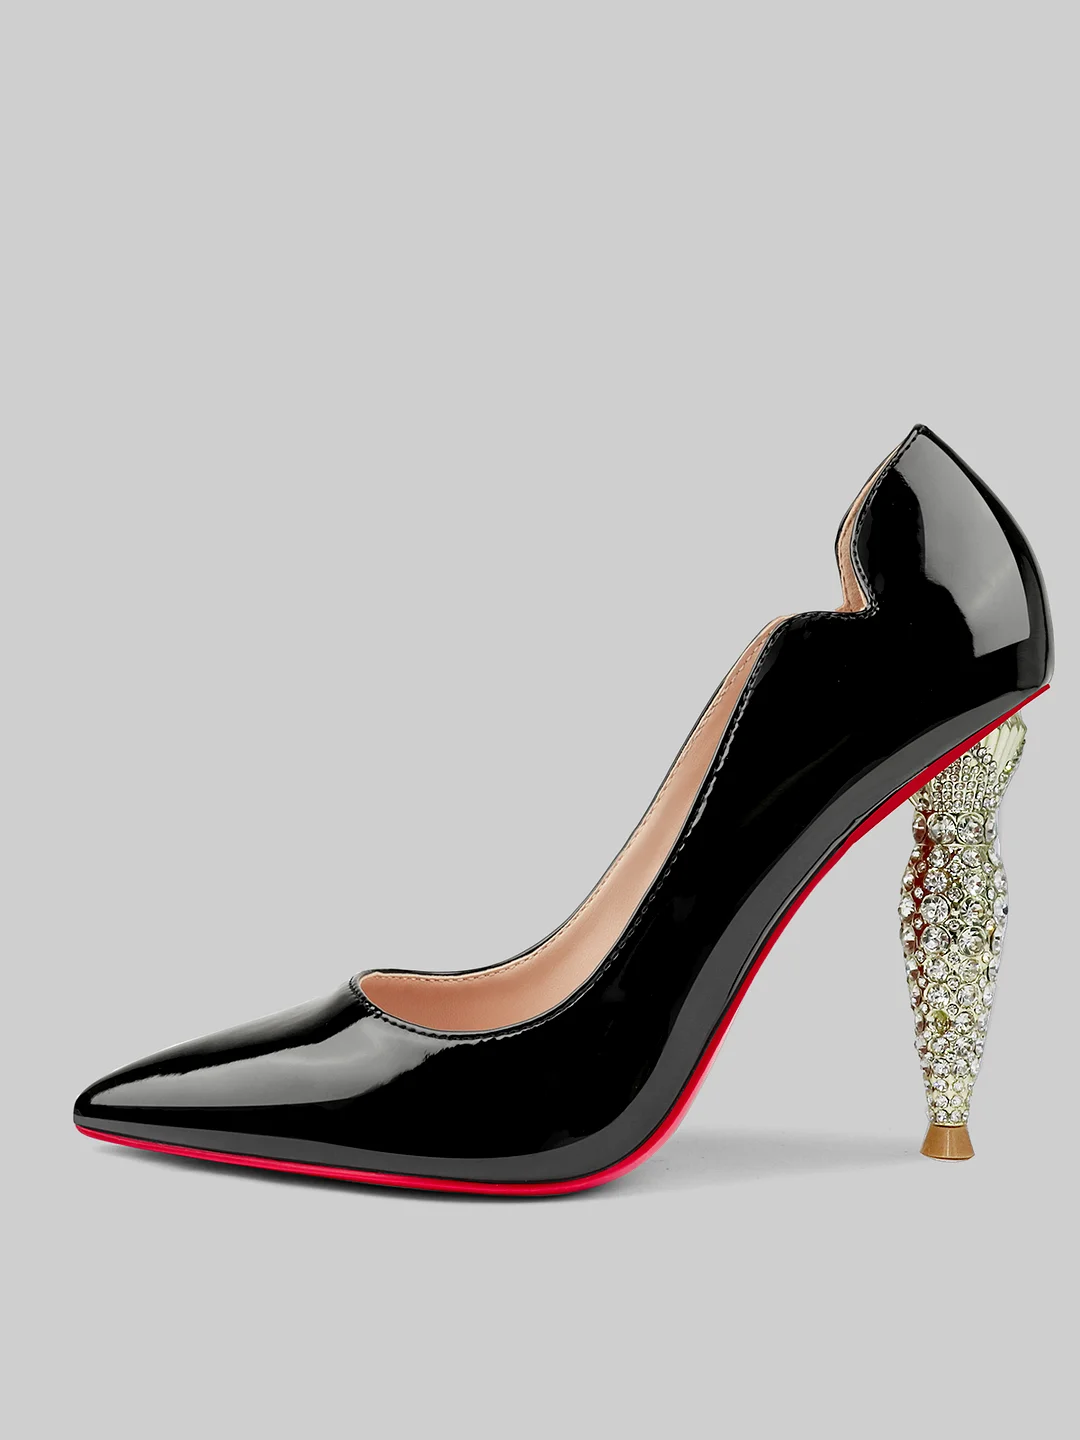 100mm Women's High Heels for Party Wedding Patent Red Bottom Pumps Black-US10.5